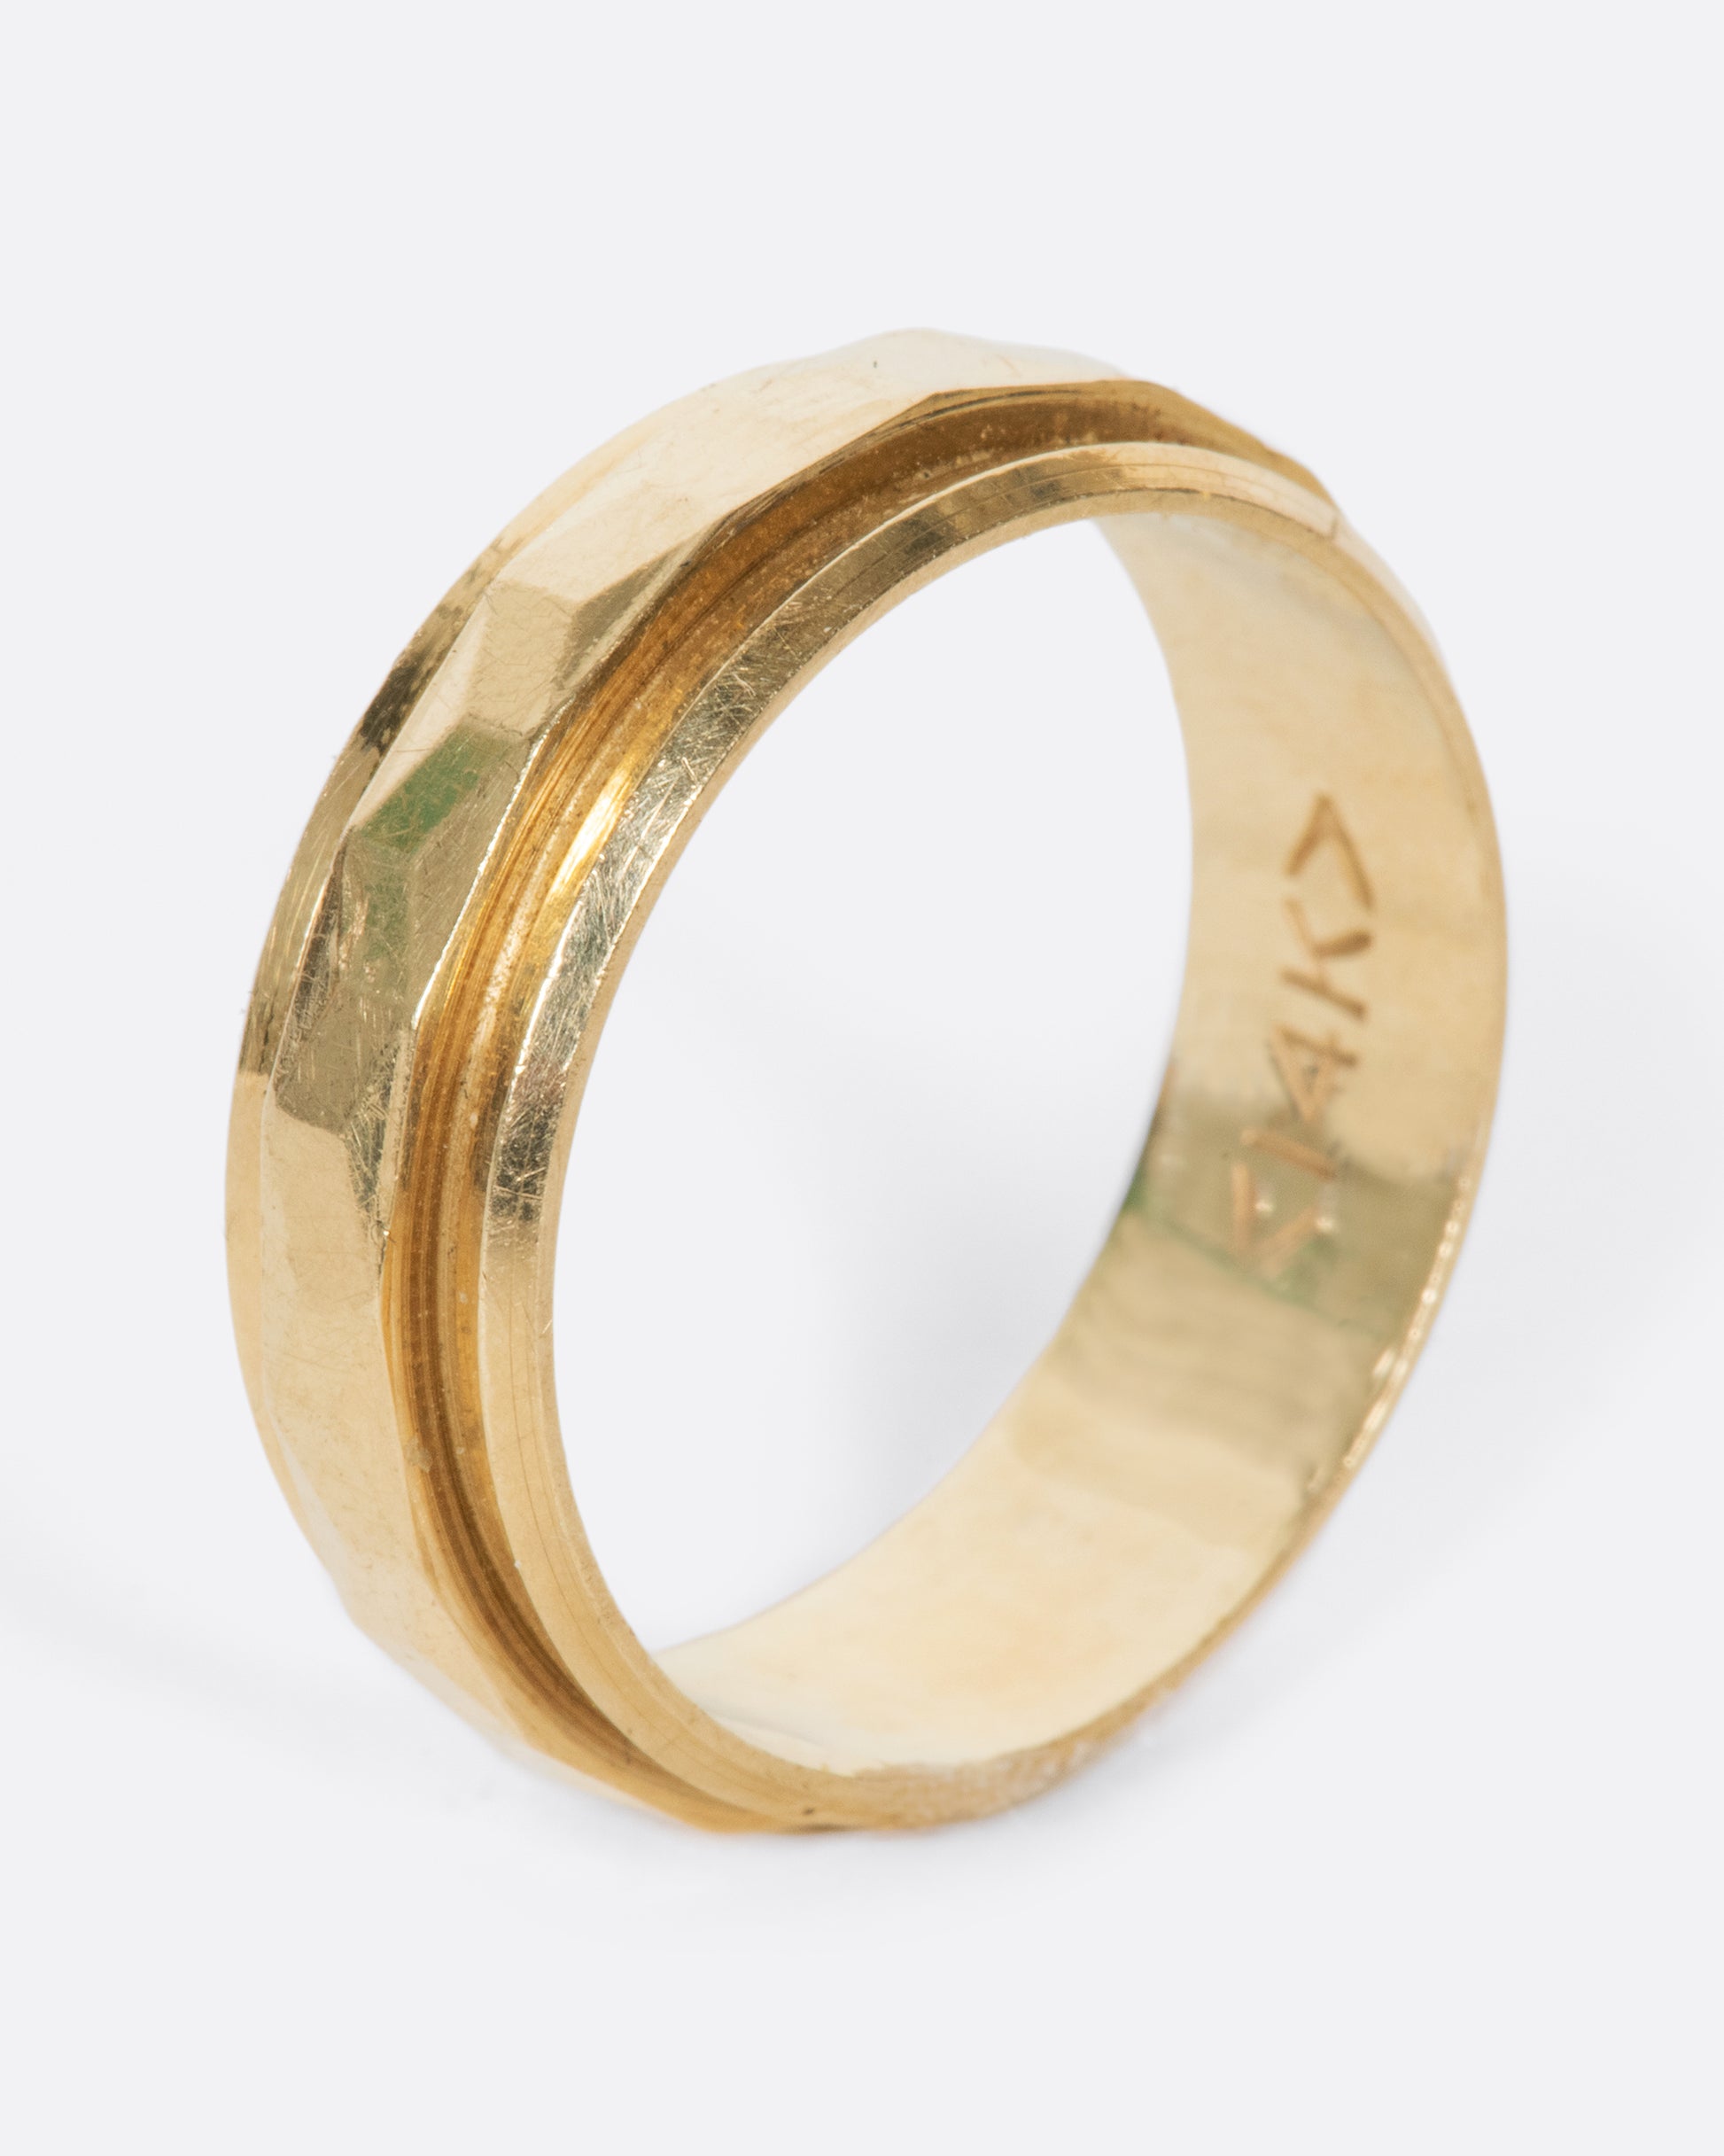 A vintage yellow gold band with geometric faceting down the center.